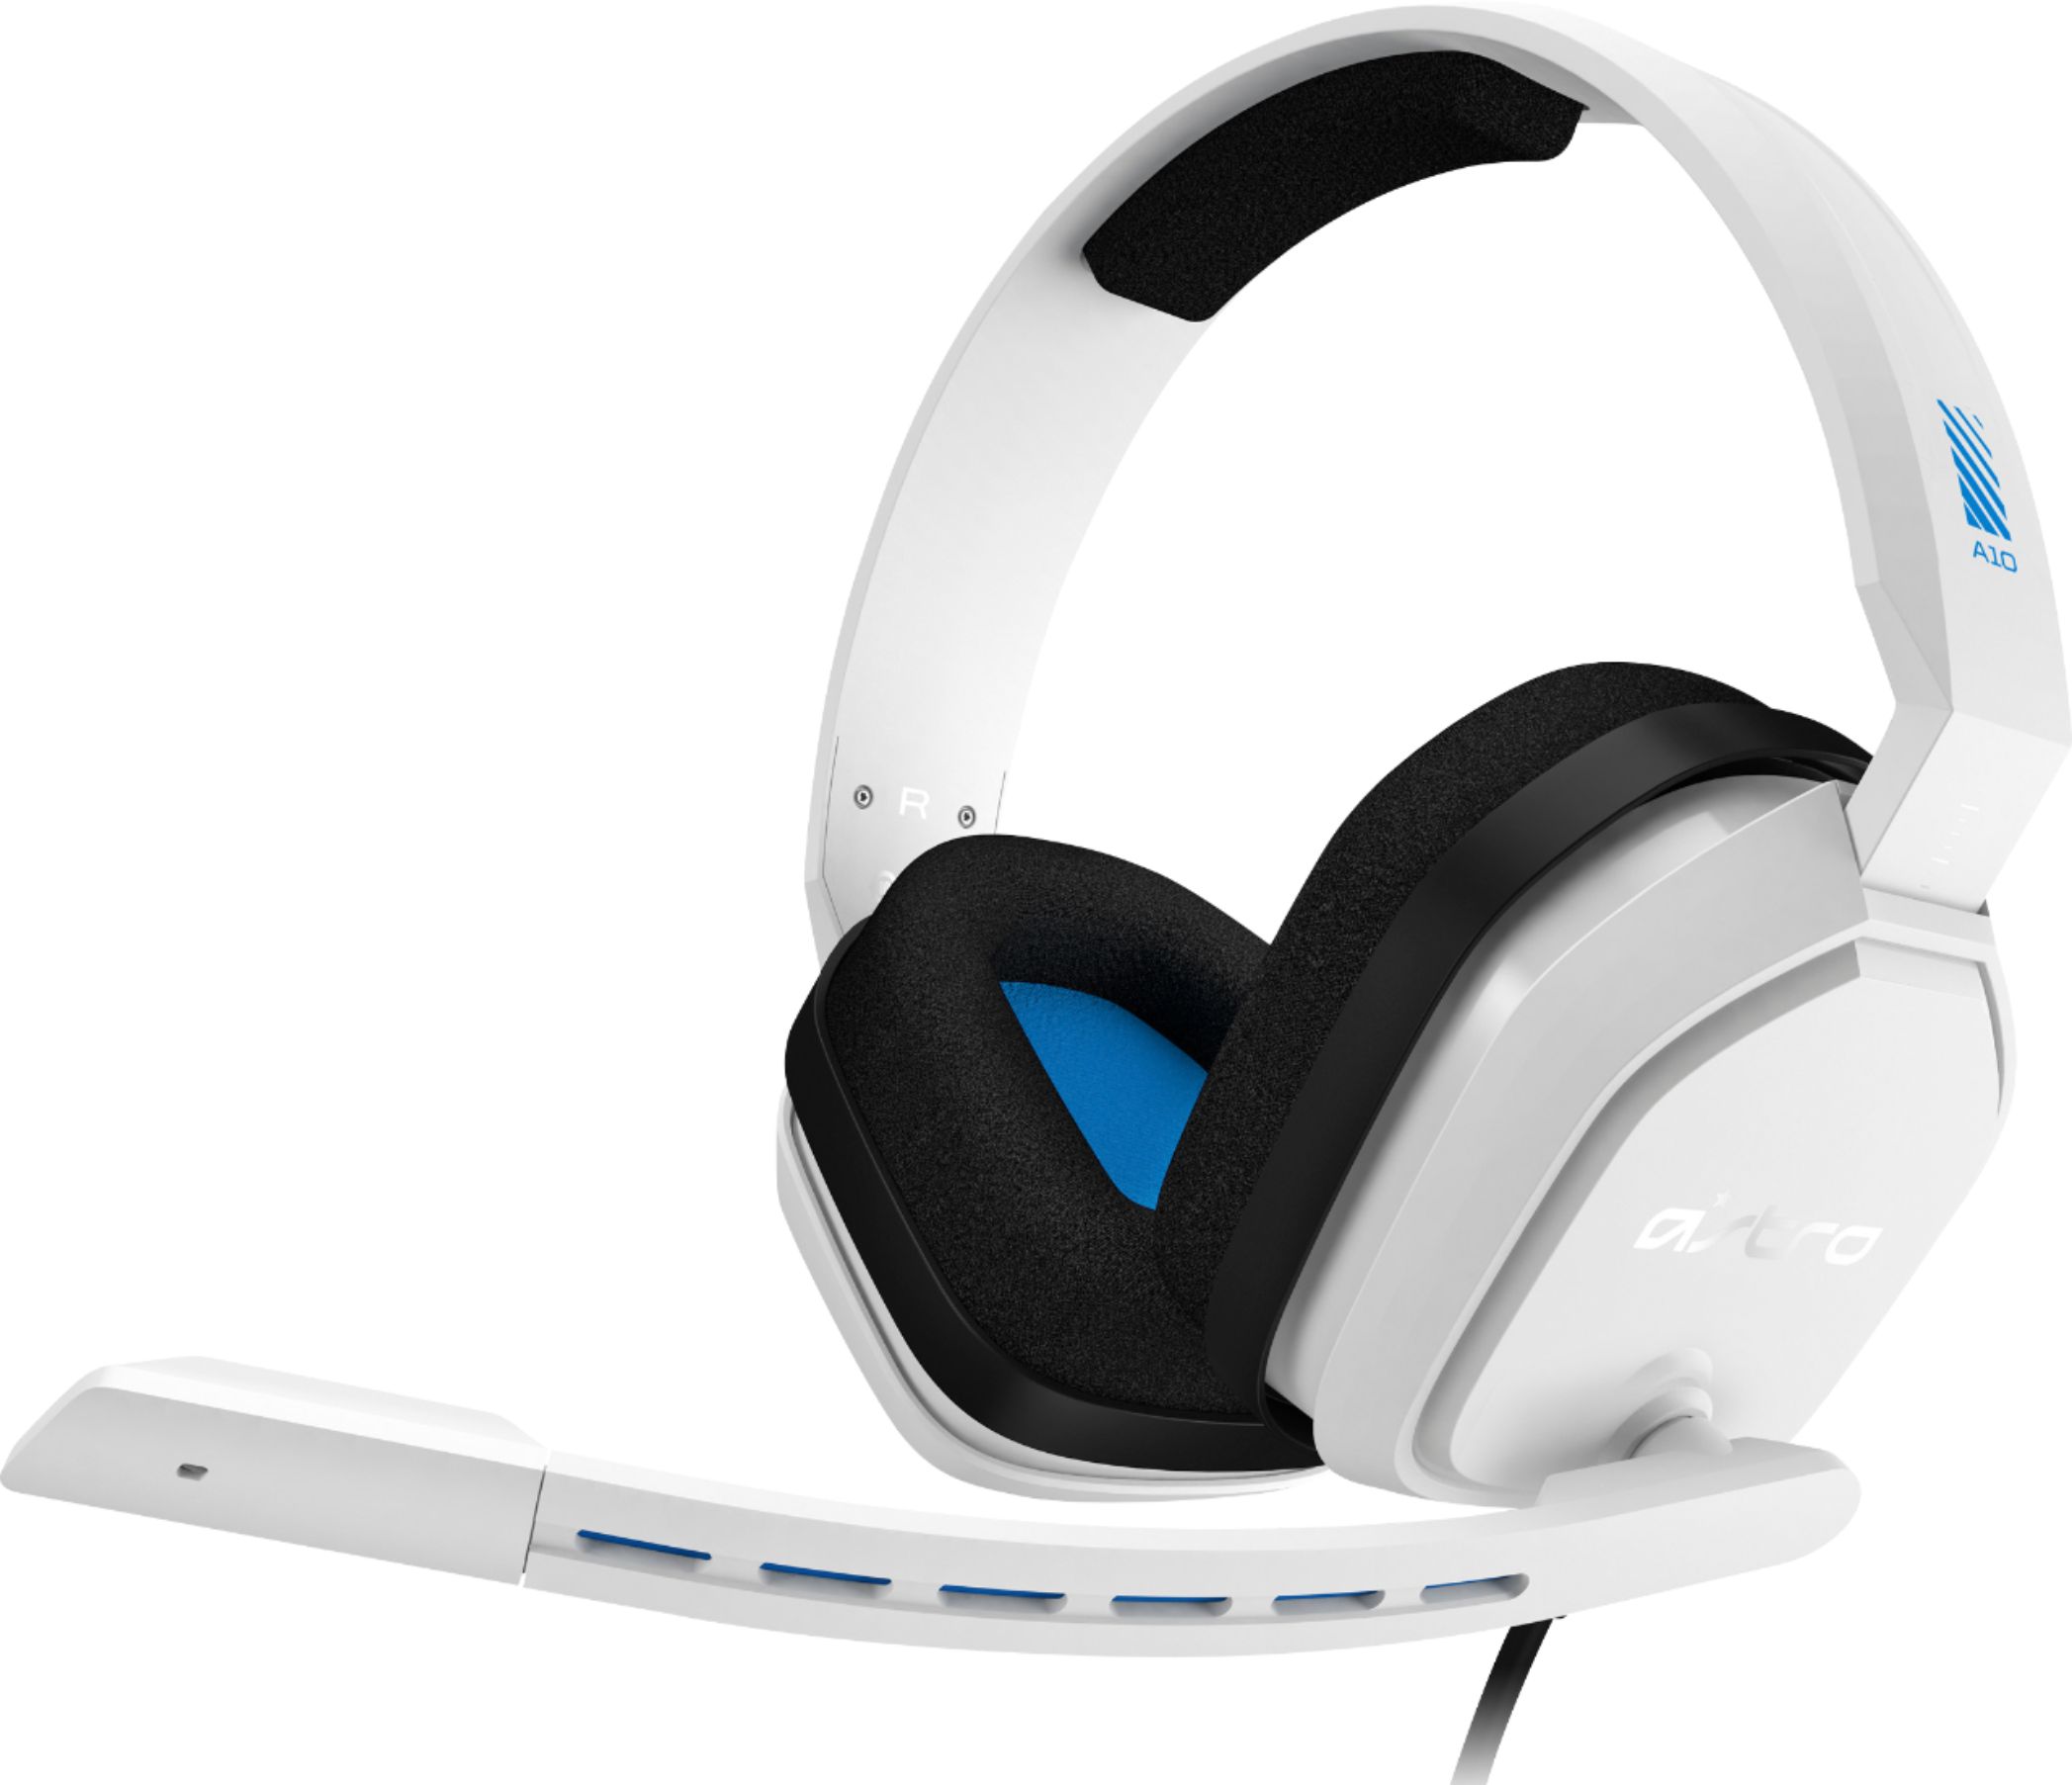 playstation a10 headset